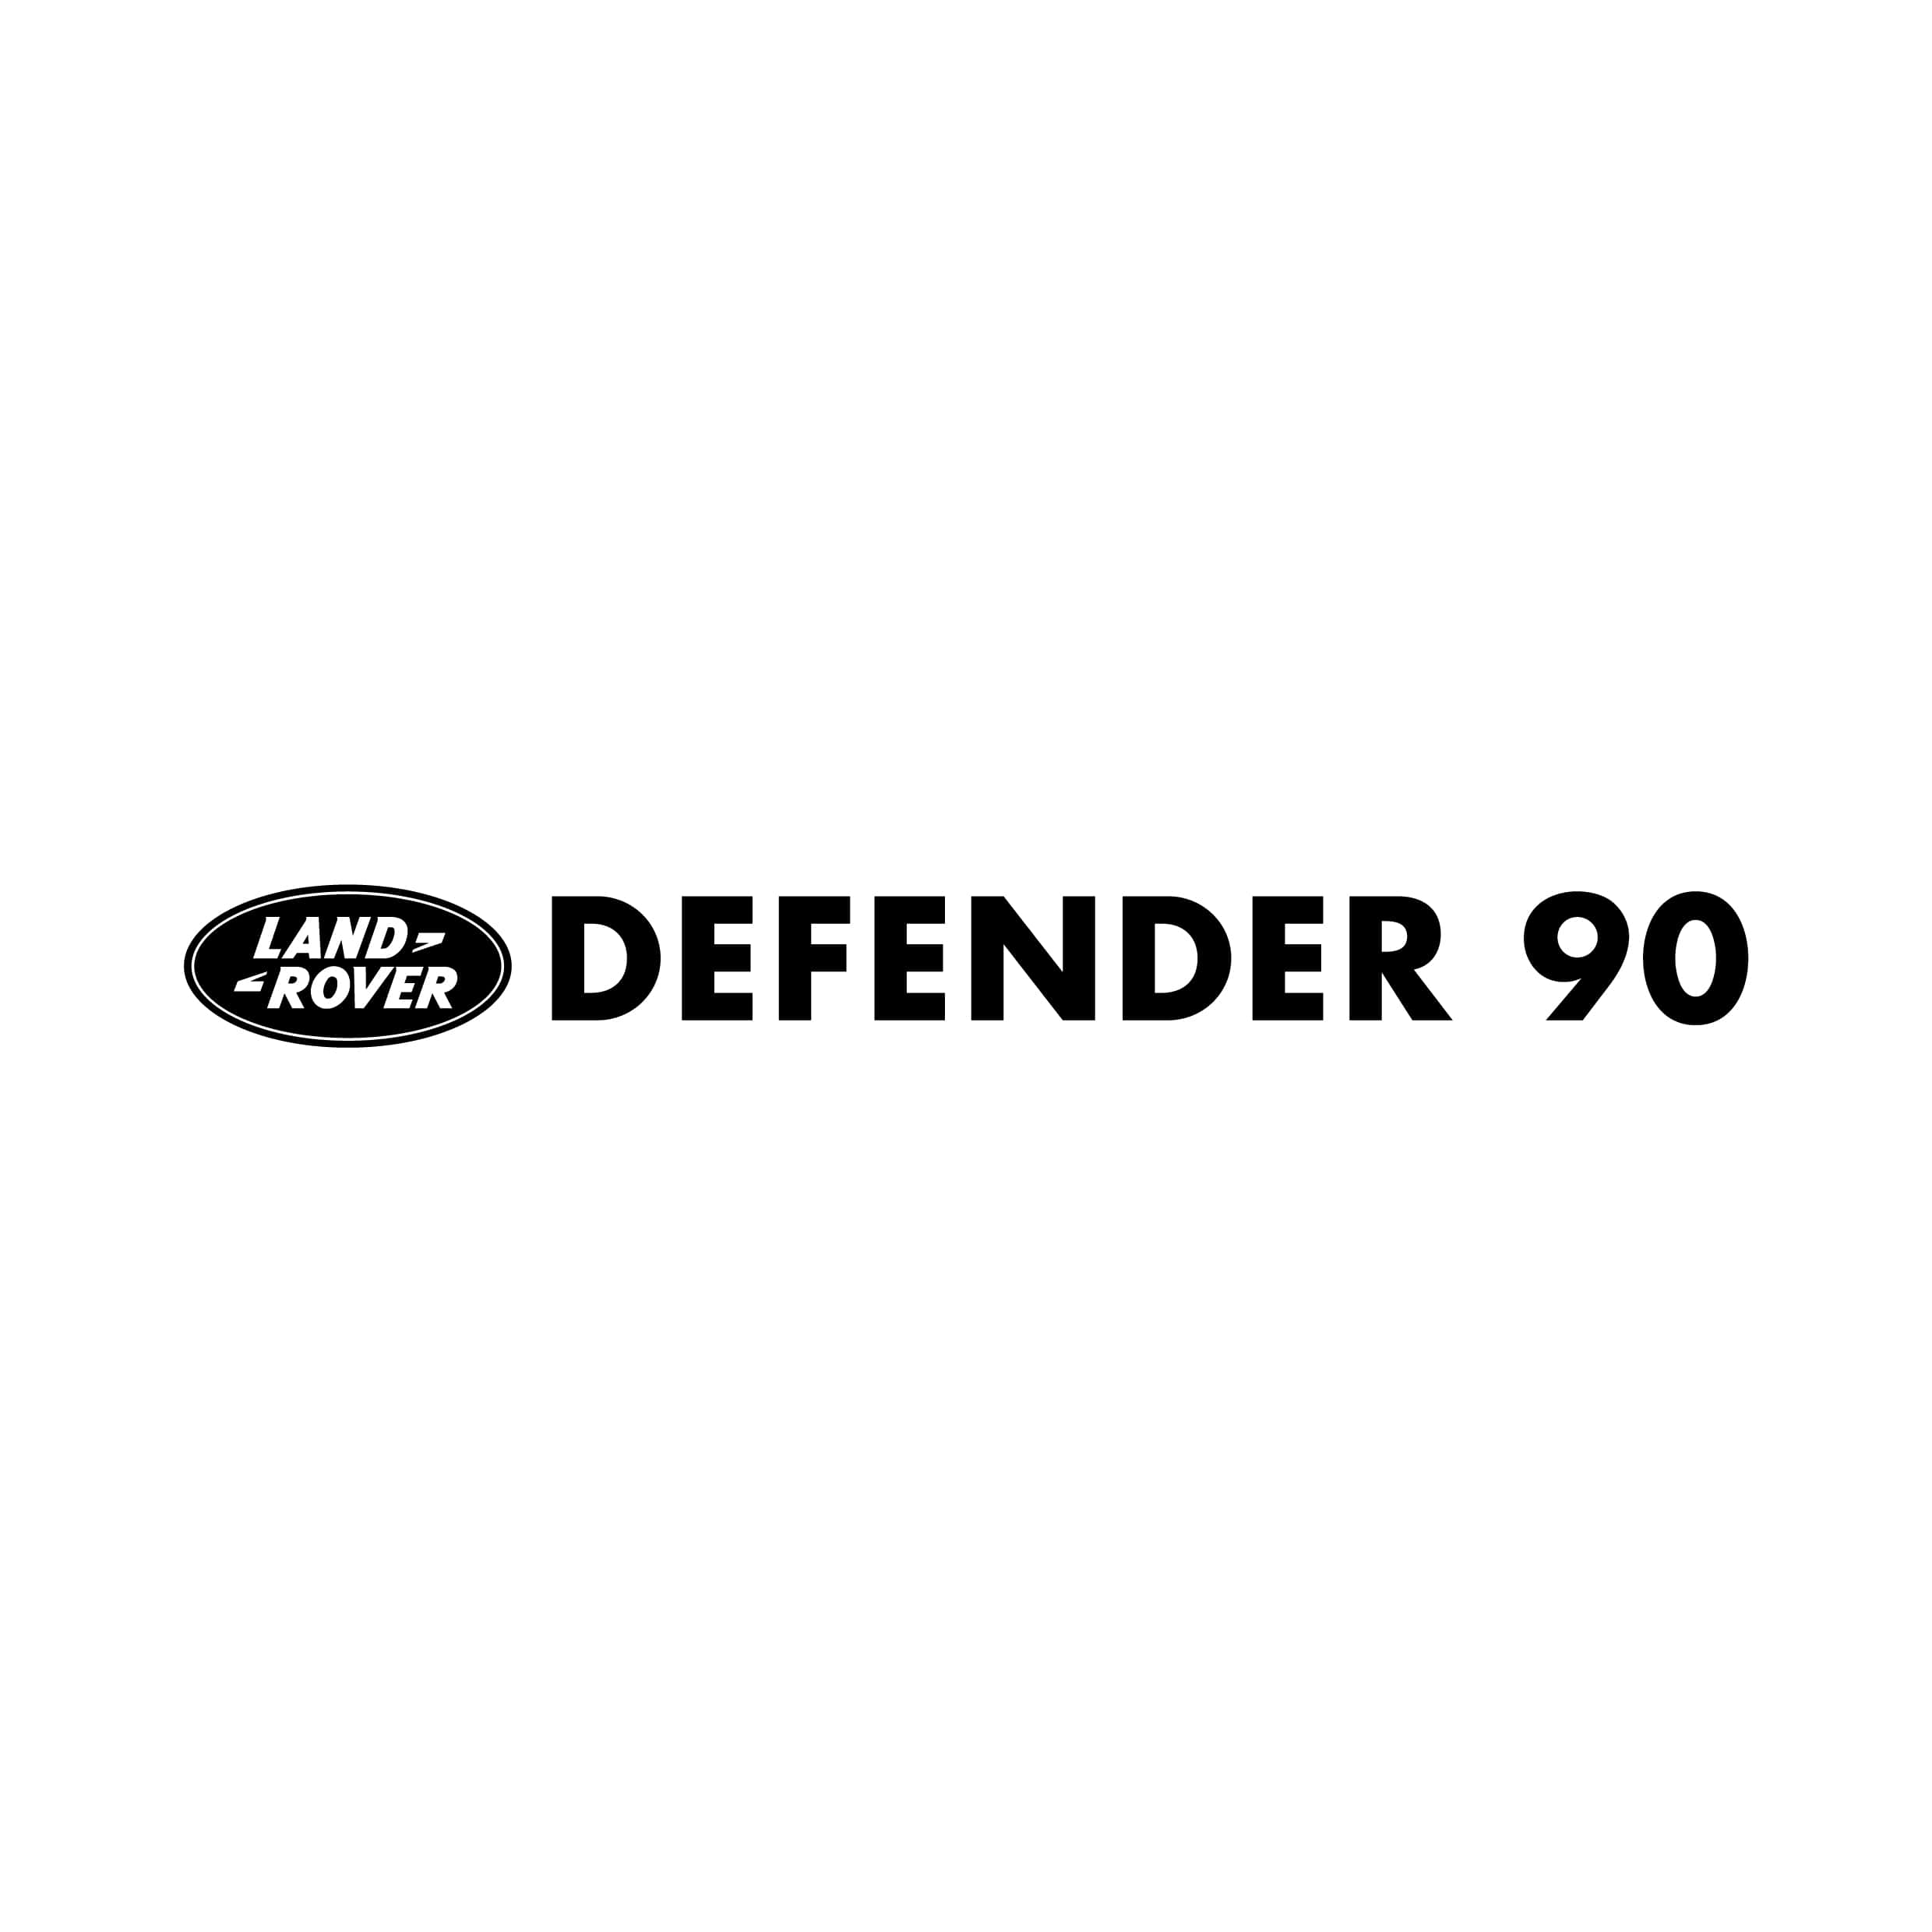 stickers-defender-90-land-rover-ref23-autocollant-4x4-sticker-suv-off-road-autocollants-decals-sponsors-tuning-rallye-voiture-logo-min